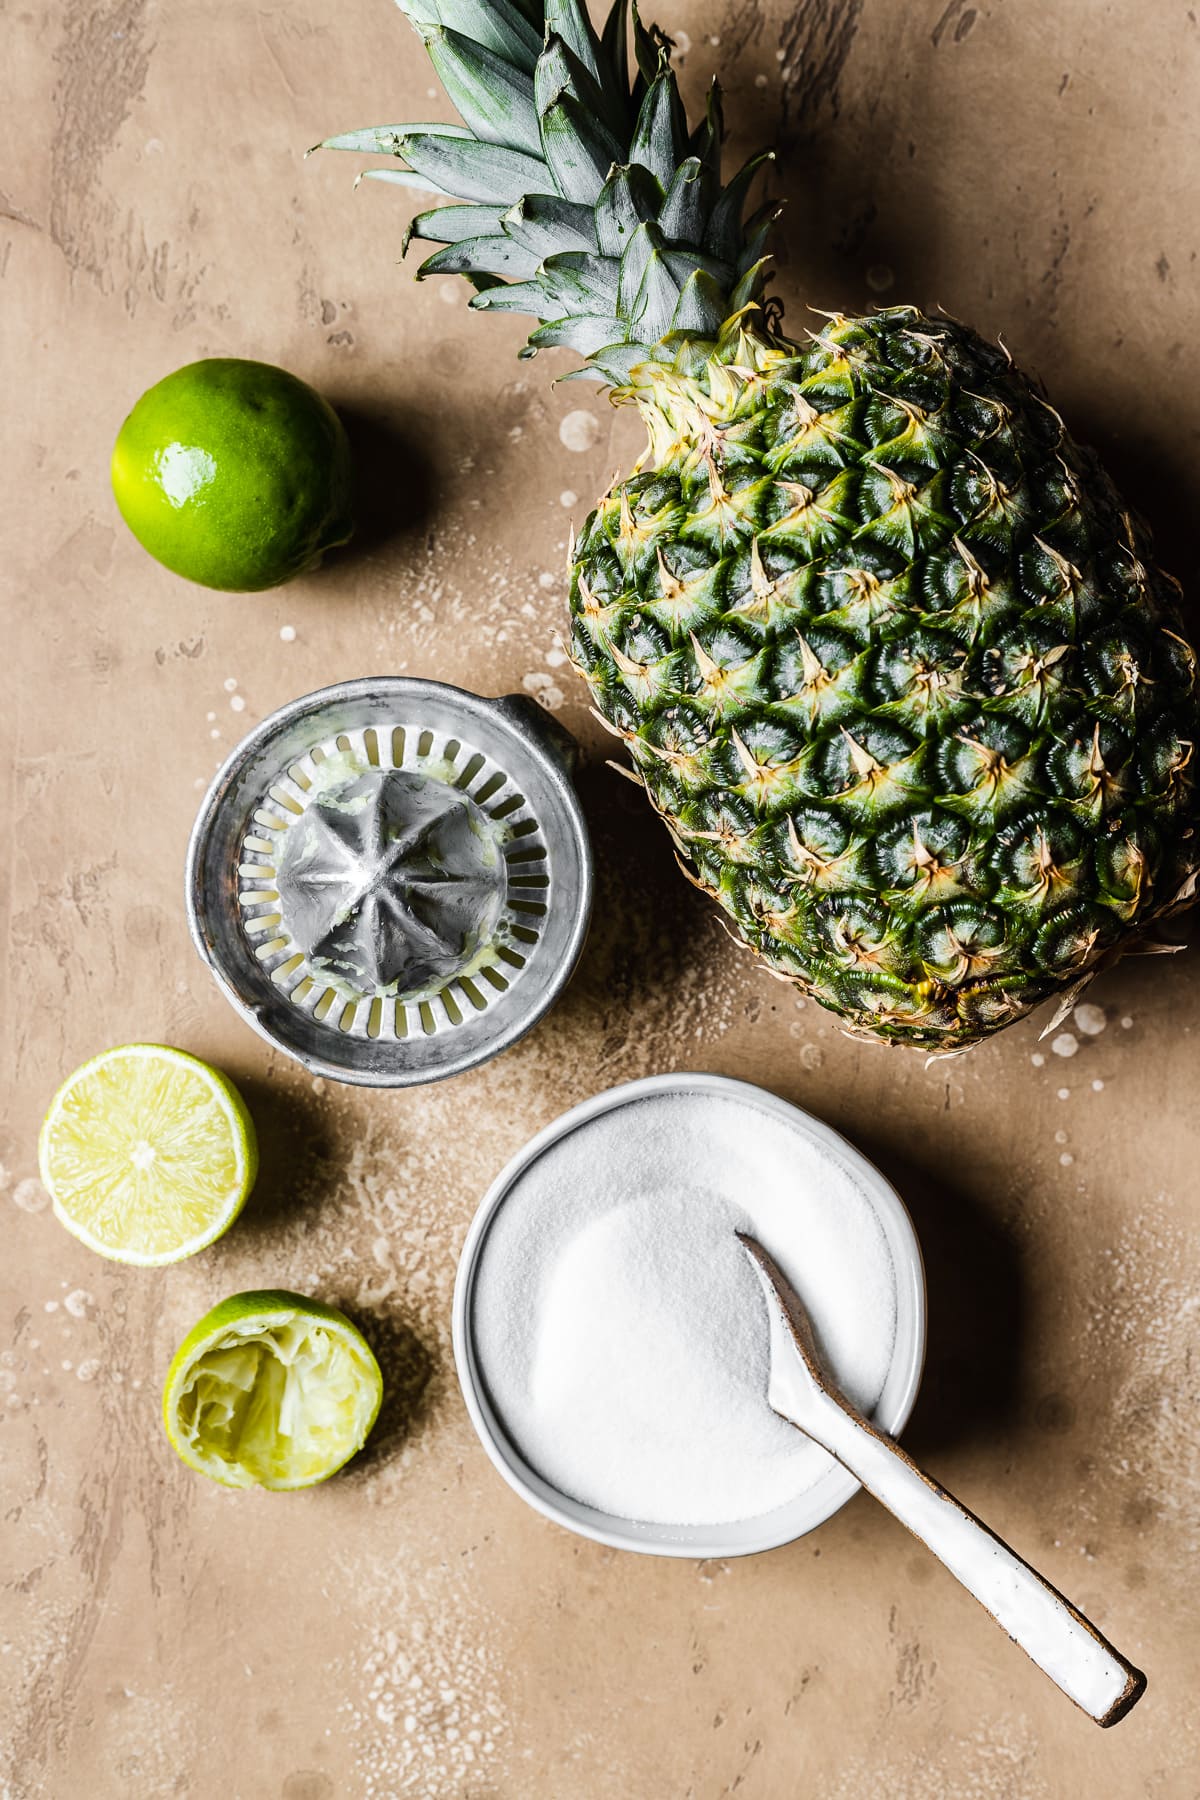 A photo showing the ingredients for pineapple jam: a fresh pinapple, granulated sugar in a white ceramic bowl with a white spoon, and a vintage metal juicer with a whole lime and a squeezed lime nearby. The items rest on a speckled tan stone surface.